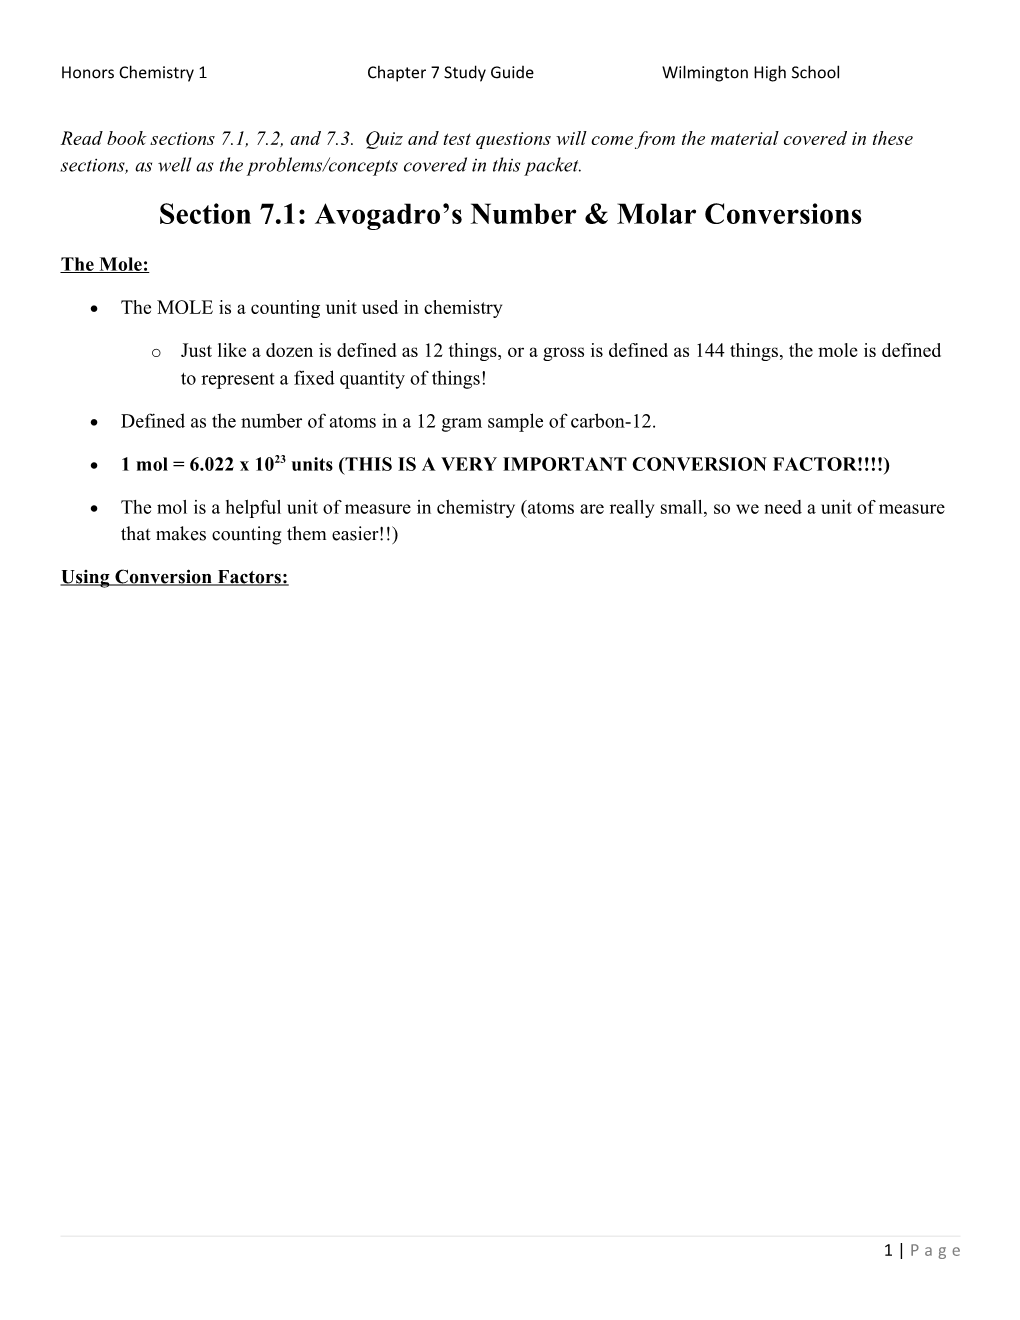 Section 7.1: Avogadro S Number & Molar Conversions